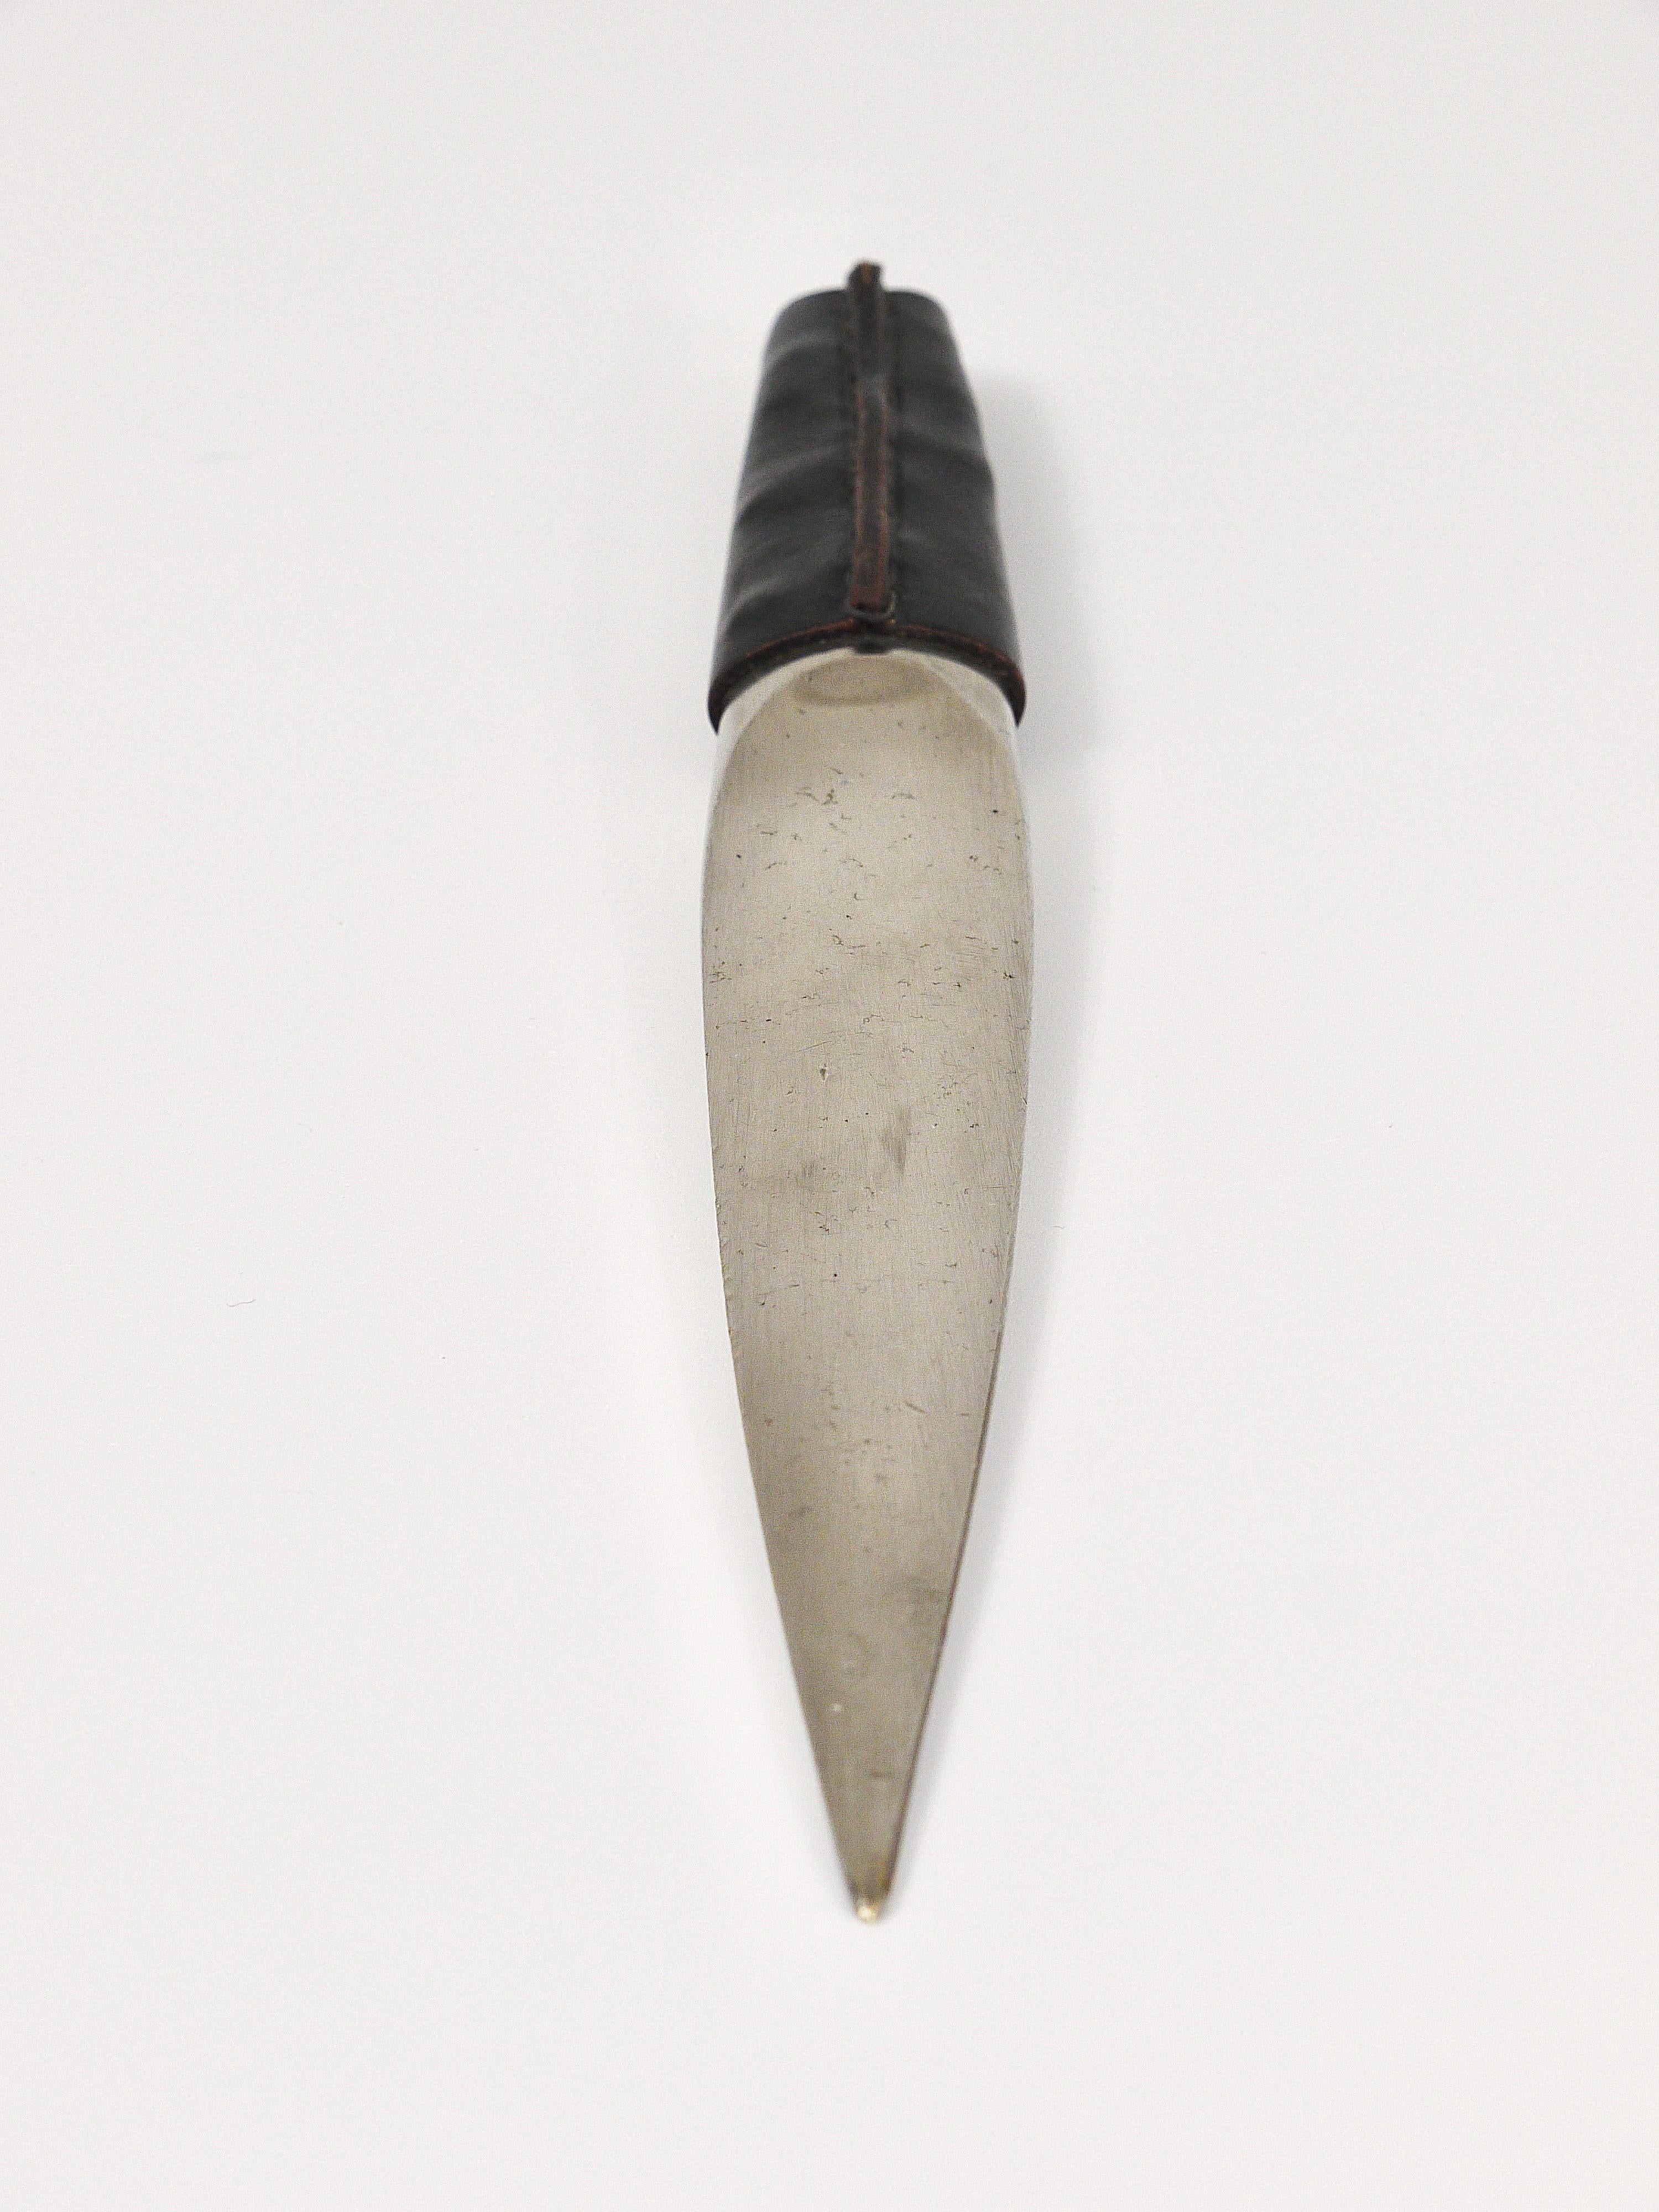 A beautiful and solid nickel-plated brass letter opener or paper knife with black leather handle from the 1950s, designed an executed by Carl Auböck, Vienna / Austria. Marked item in good condition with nice patina.